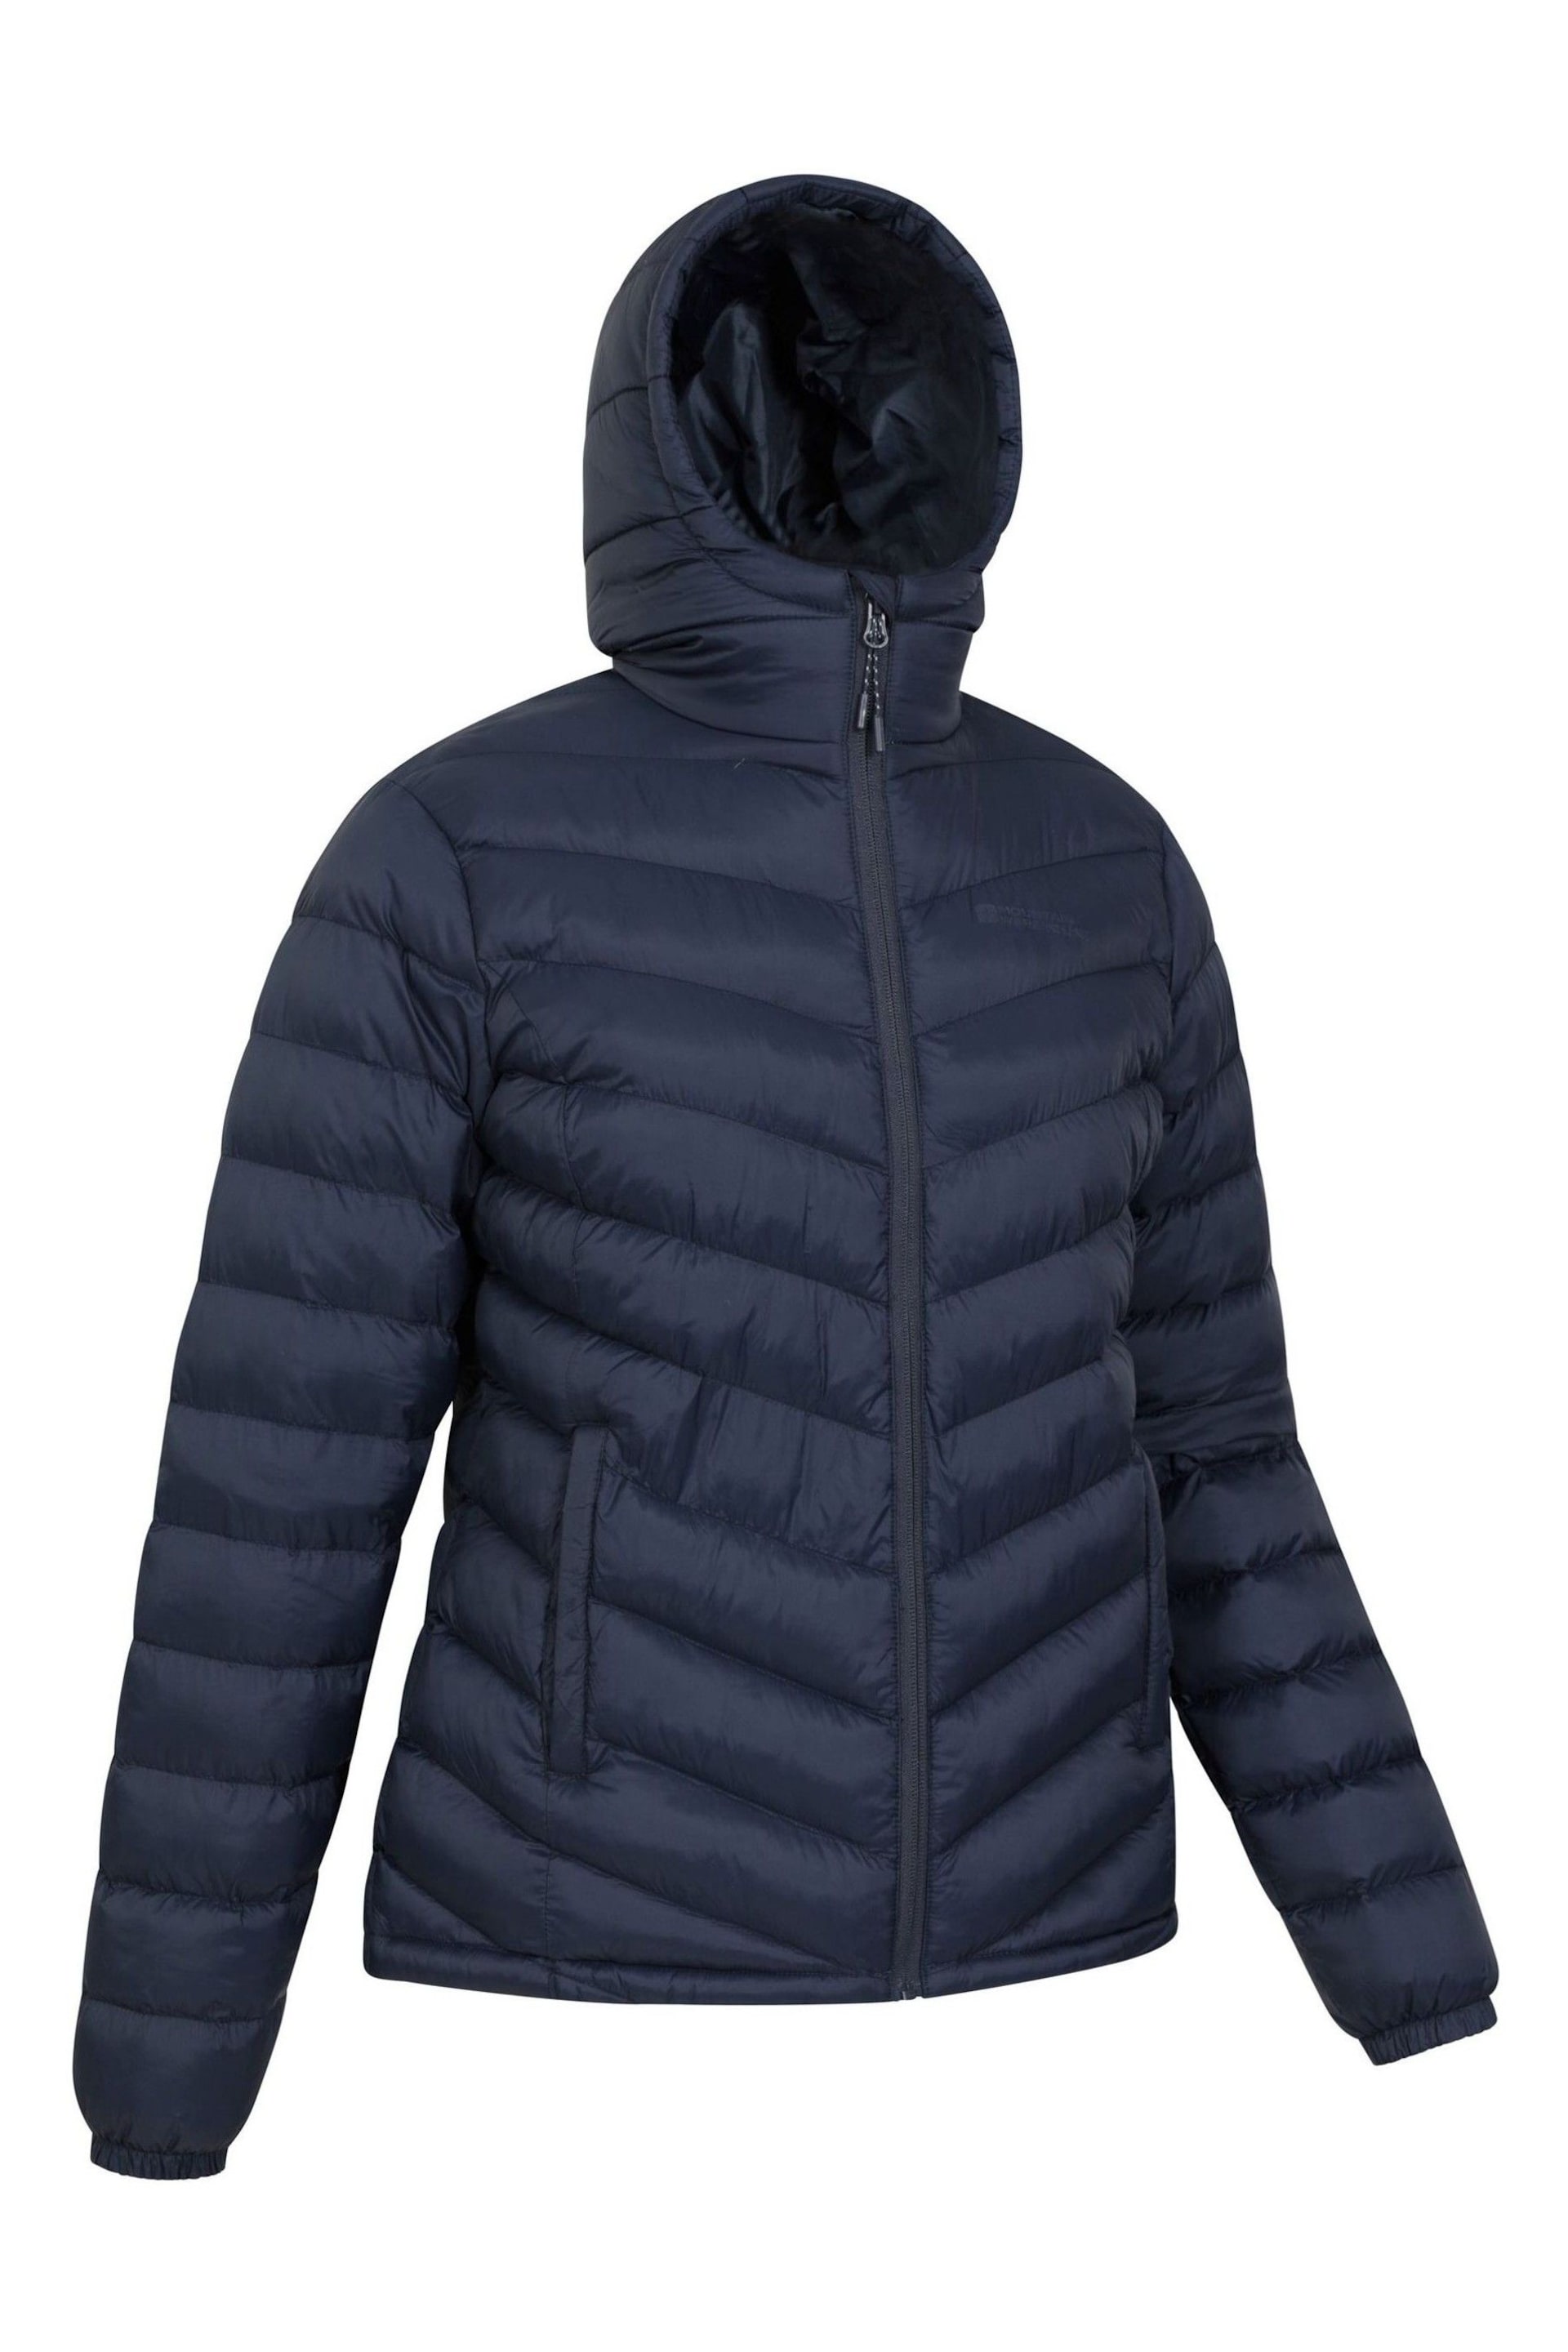 Mountain Warehouse Blue Womens Seasons Water Resistant Padded Jacket - Image 7 of 9